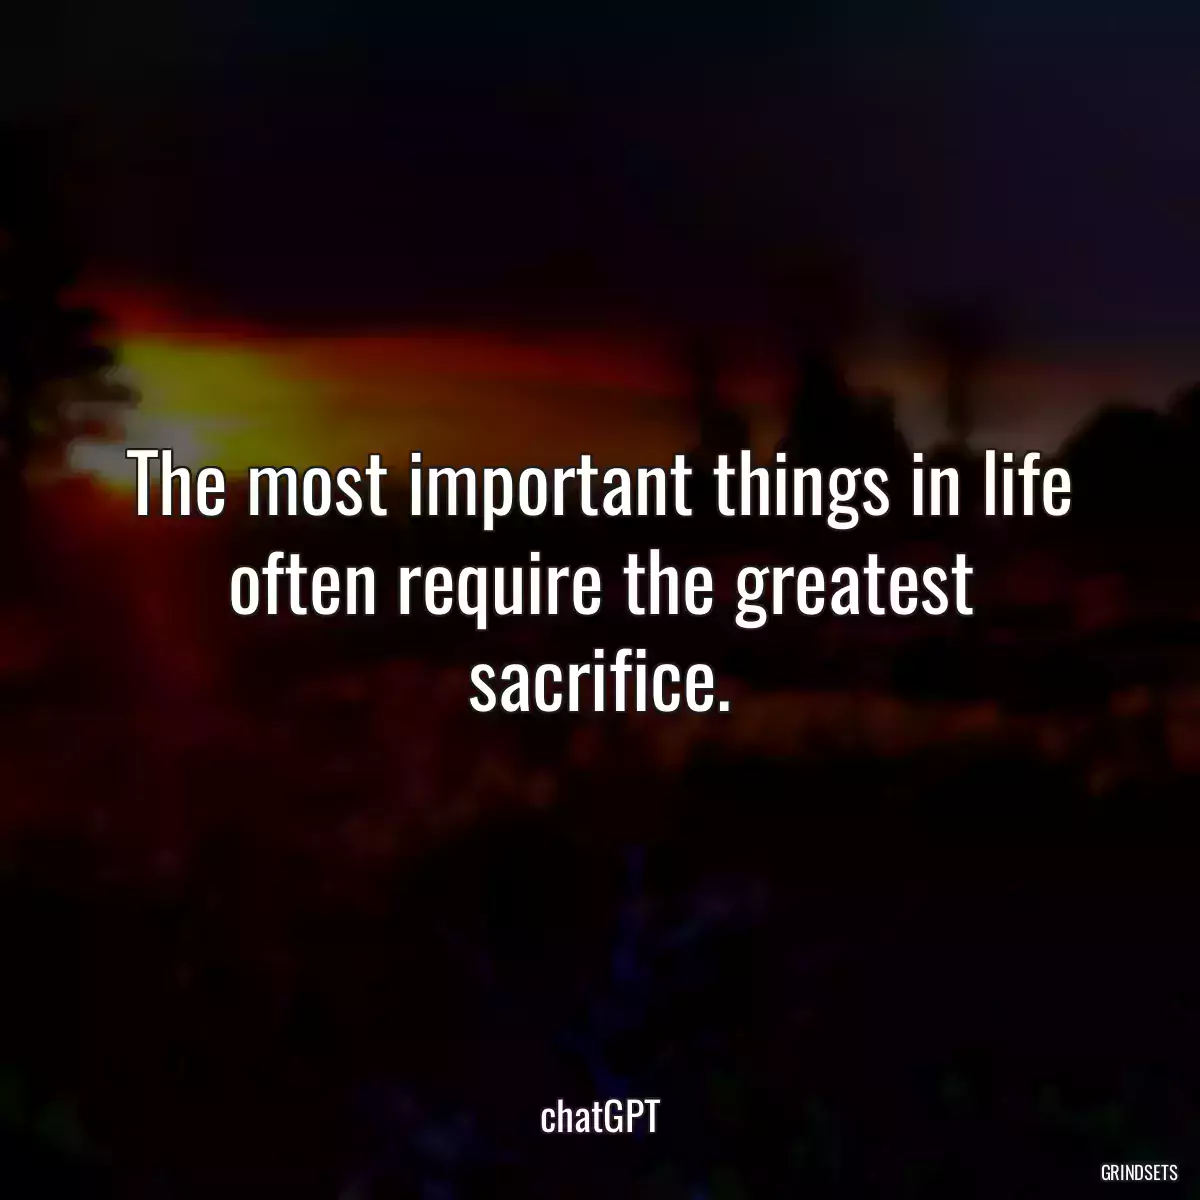 The most important things in life often require the greatest sacrifice.